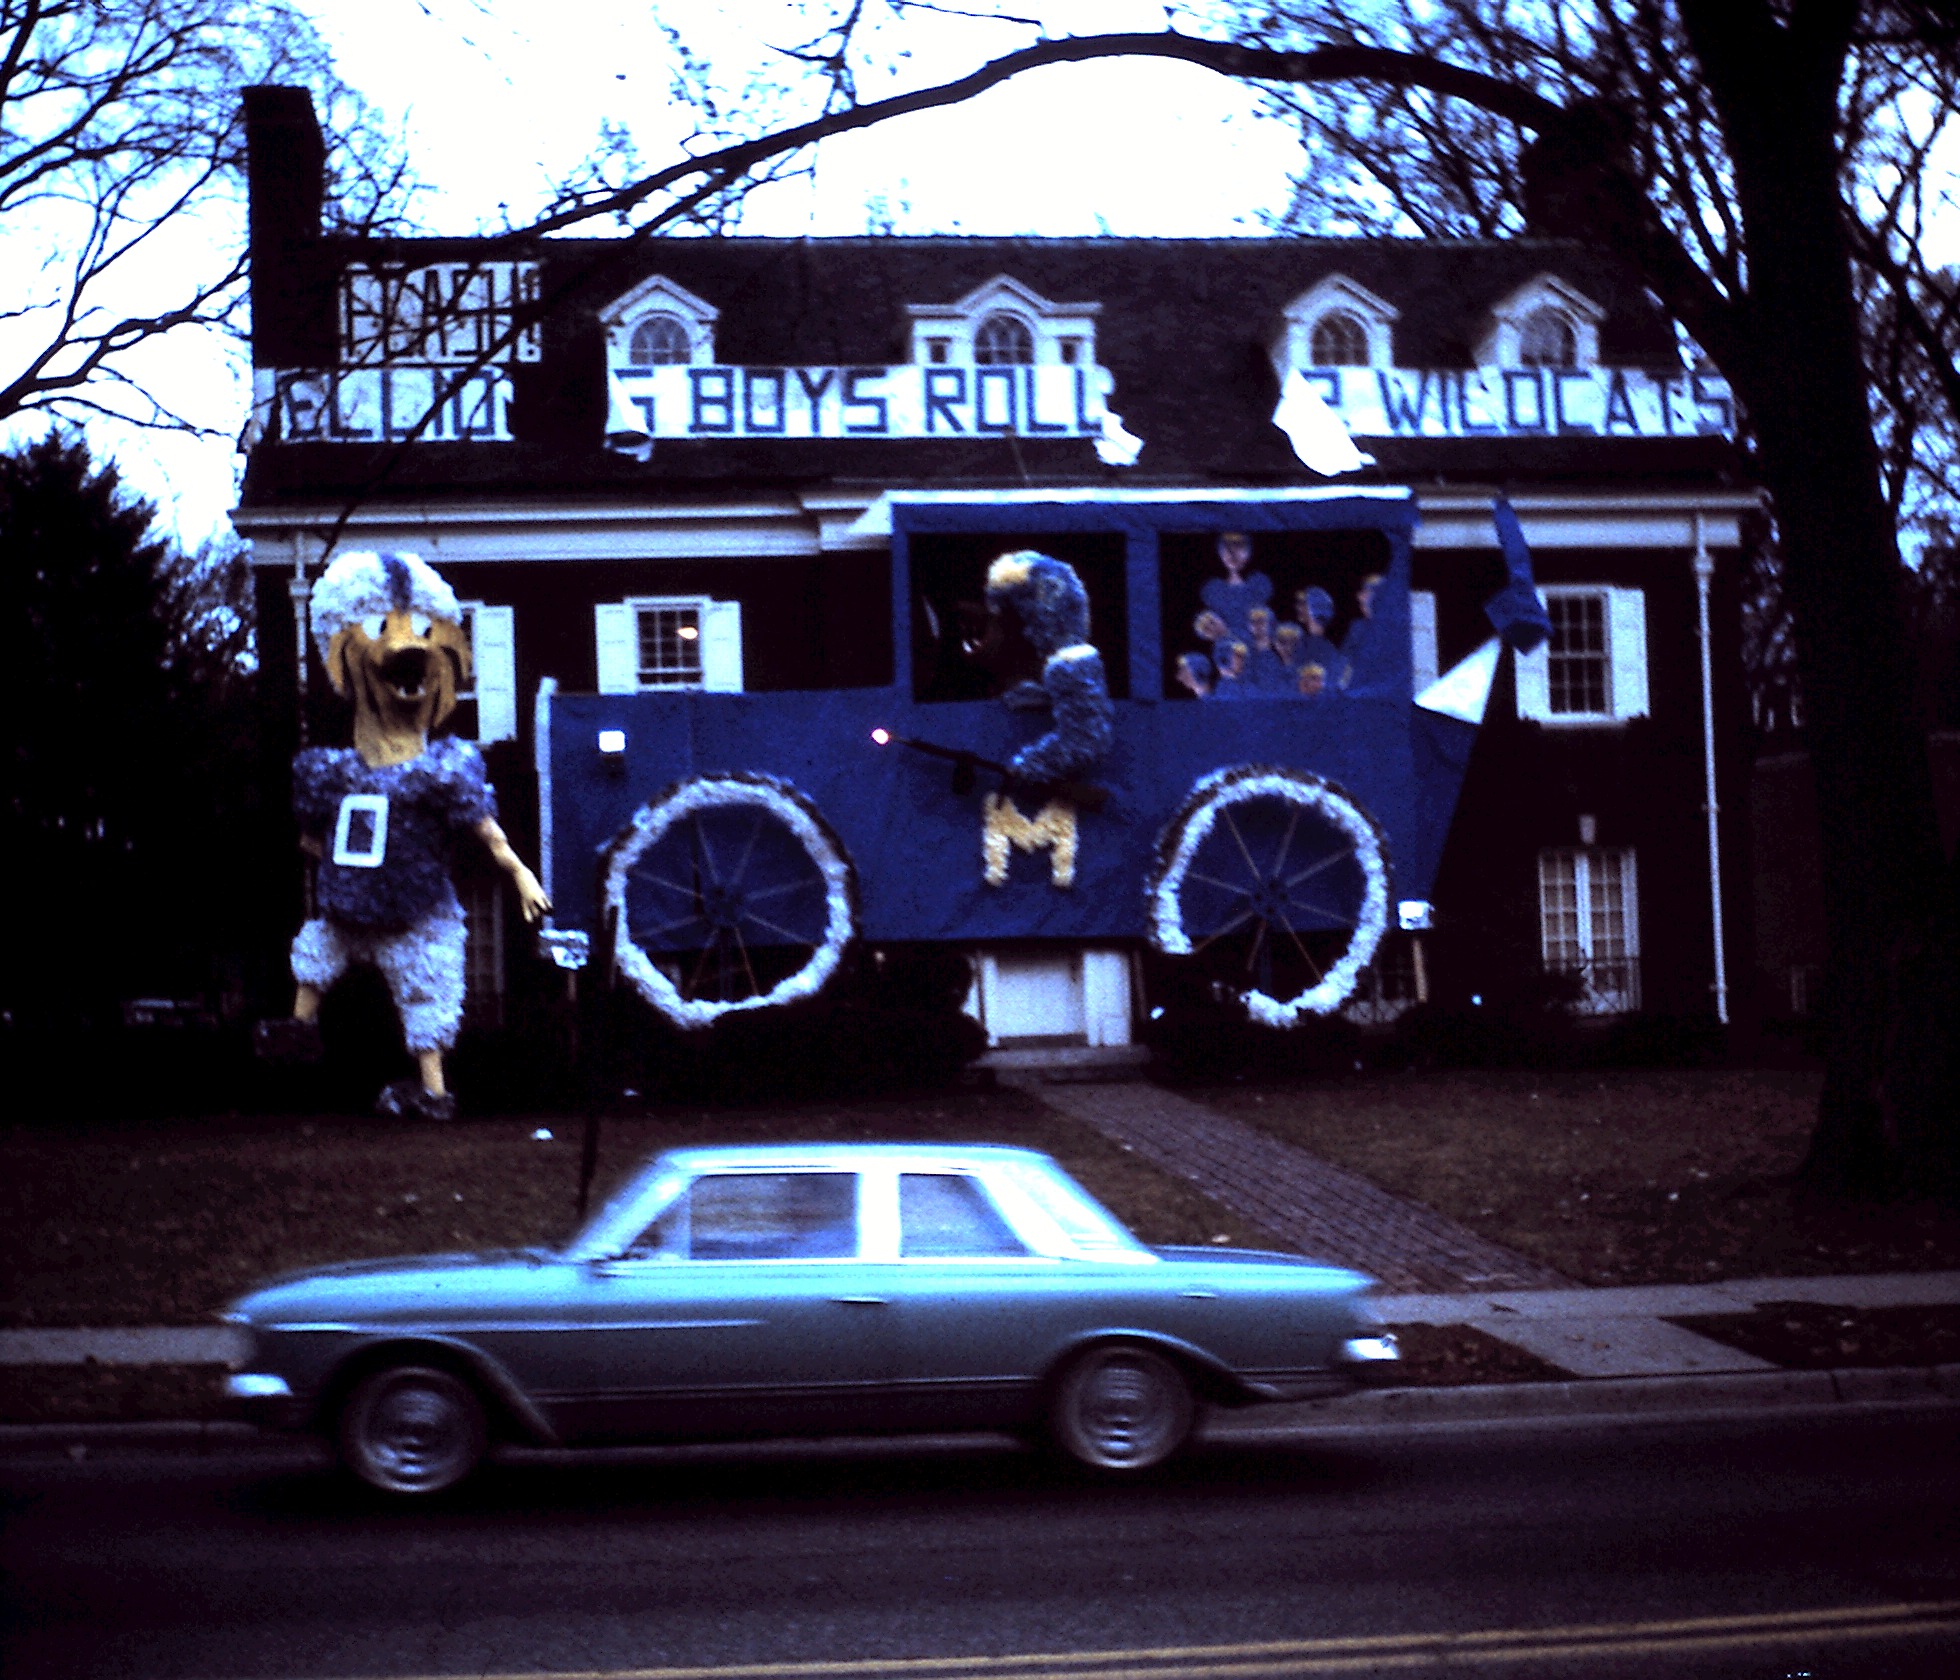  The chapter house decorated for Homecoming, 1963 